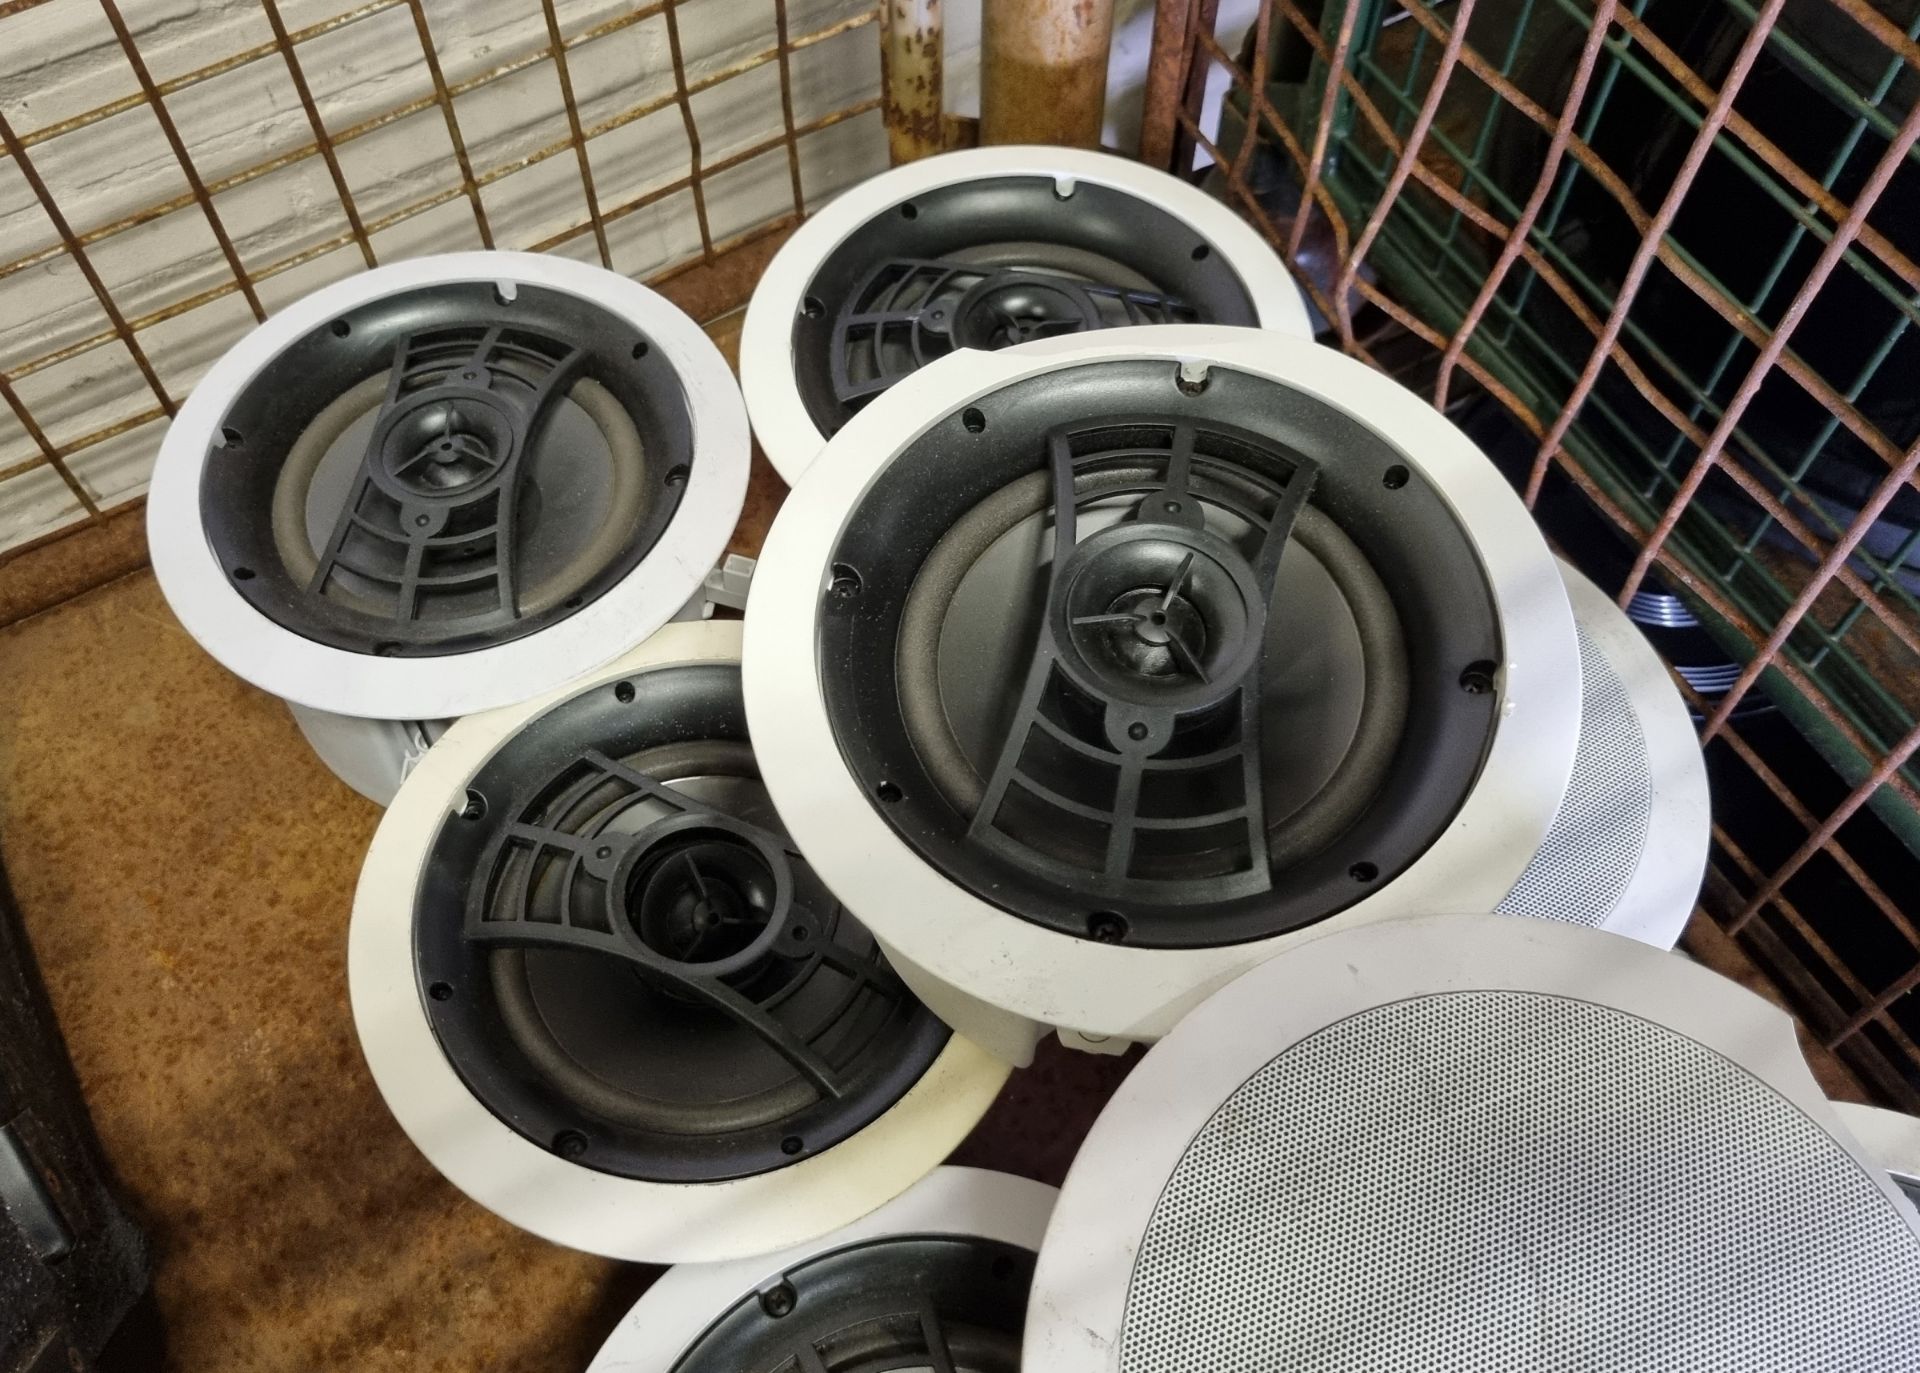 10x Vision CS-1600 30W ceiling speakers - L 230 x W 230 x H 140mm - Image 2 of 6